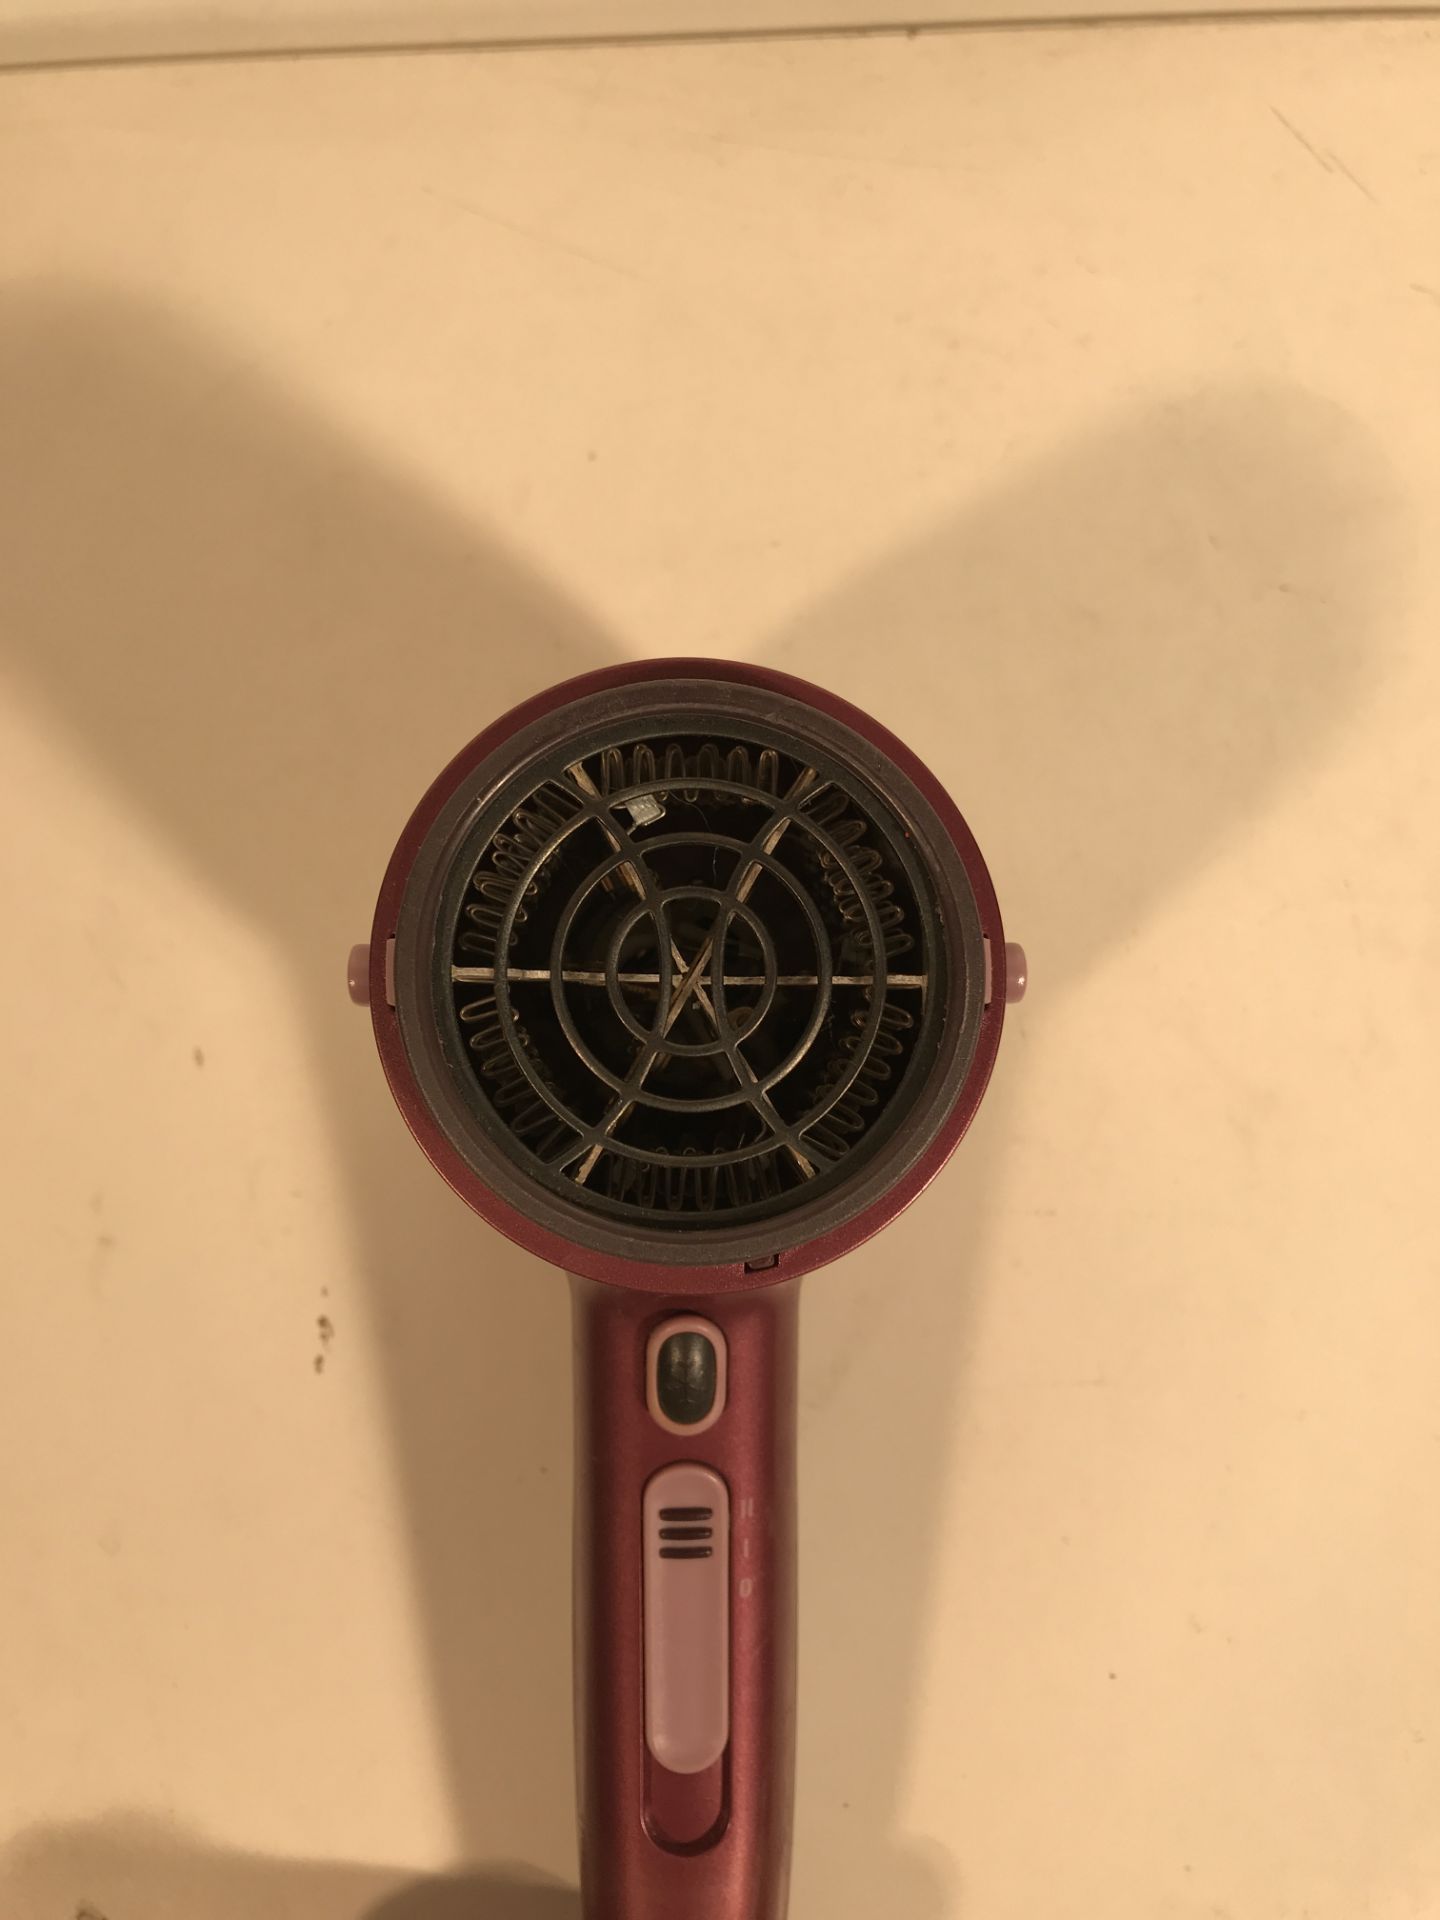 BaByliss Haircare Products | Curler | Dryer - Image 5 of 6